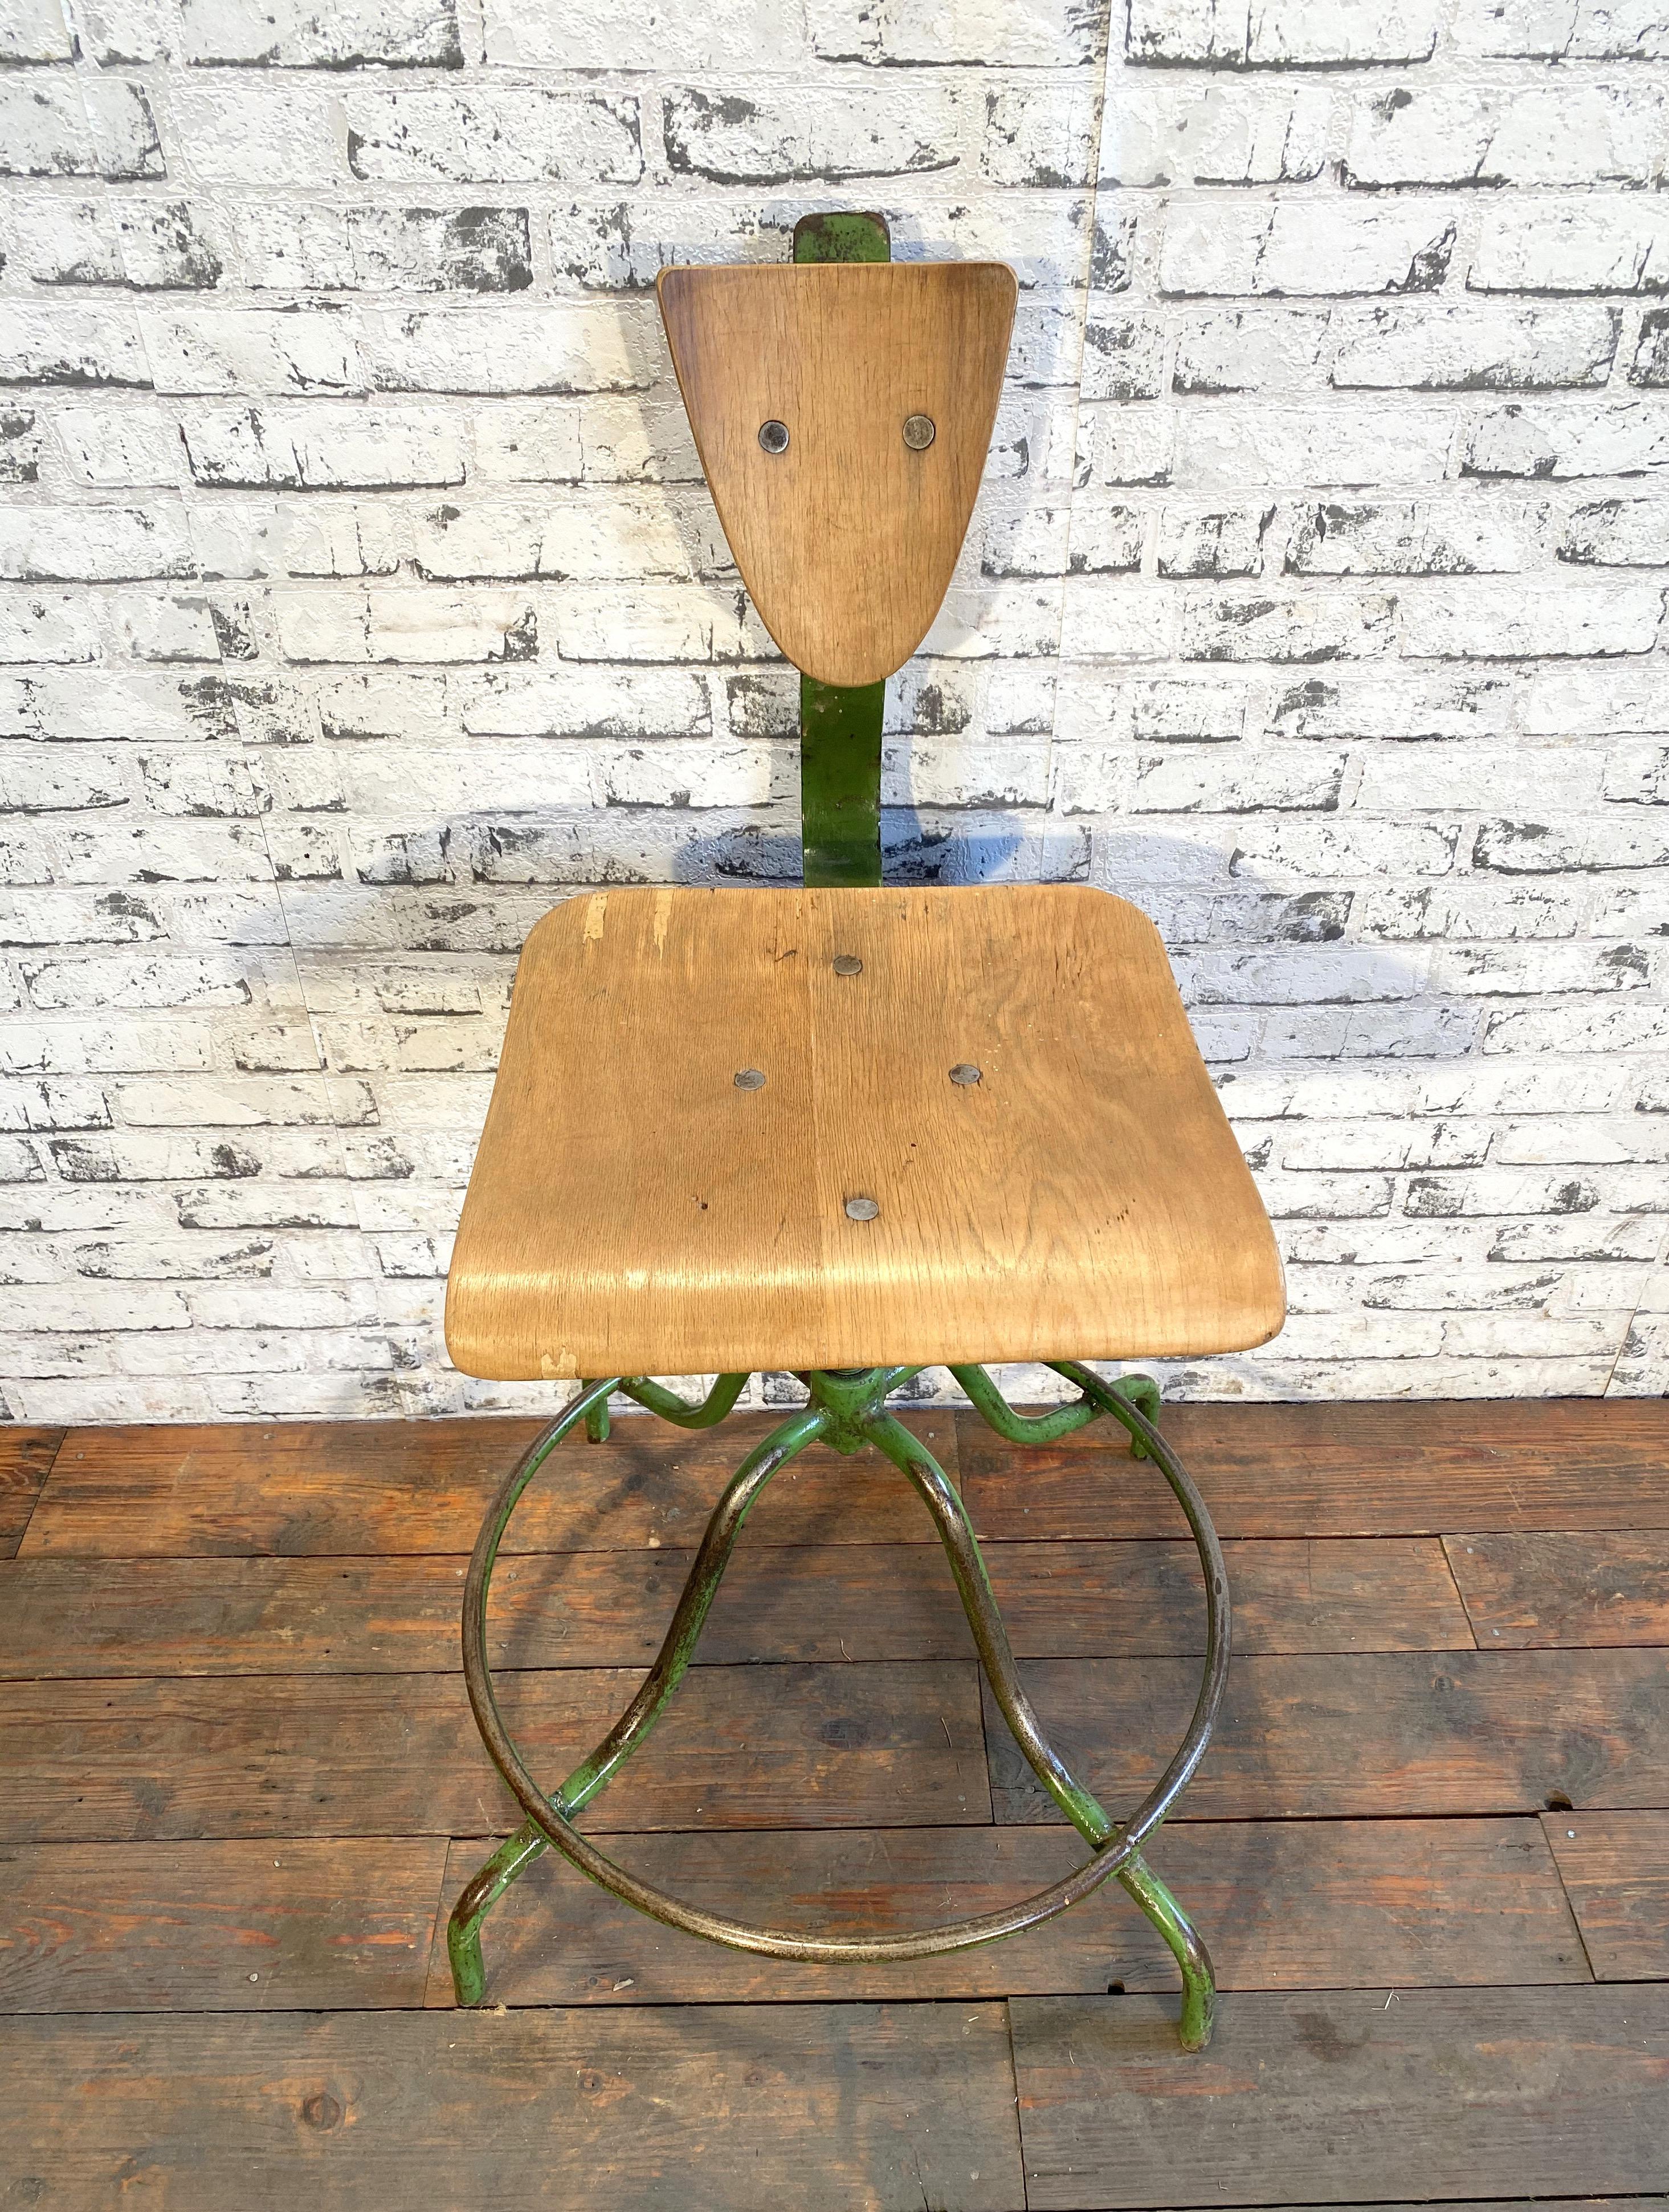 This industrial chair was made in former Czechoslovakia during the 1960s. The construction is made of green painted iron and has a plywood seat and backrest. The chair is in very good vintage condition. Weight of the chair is 8 kg.
Additional